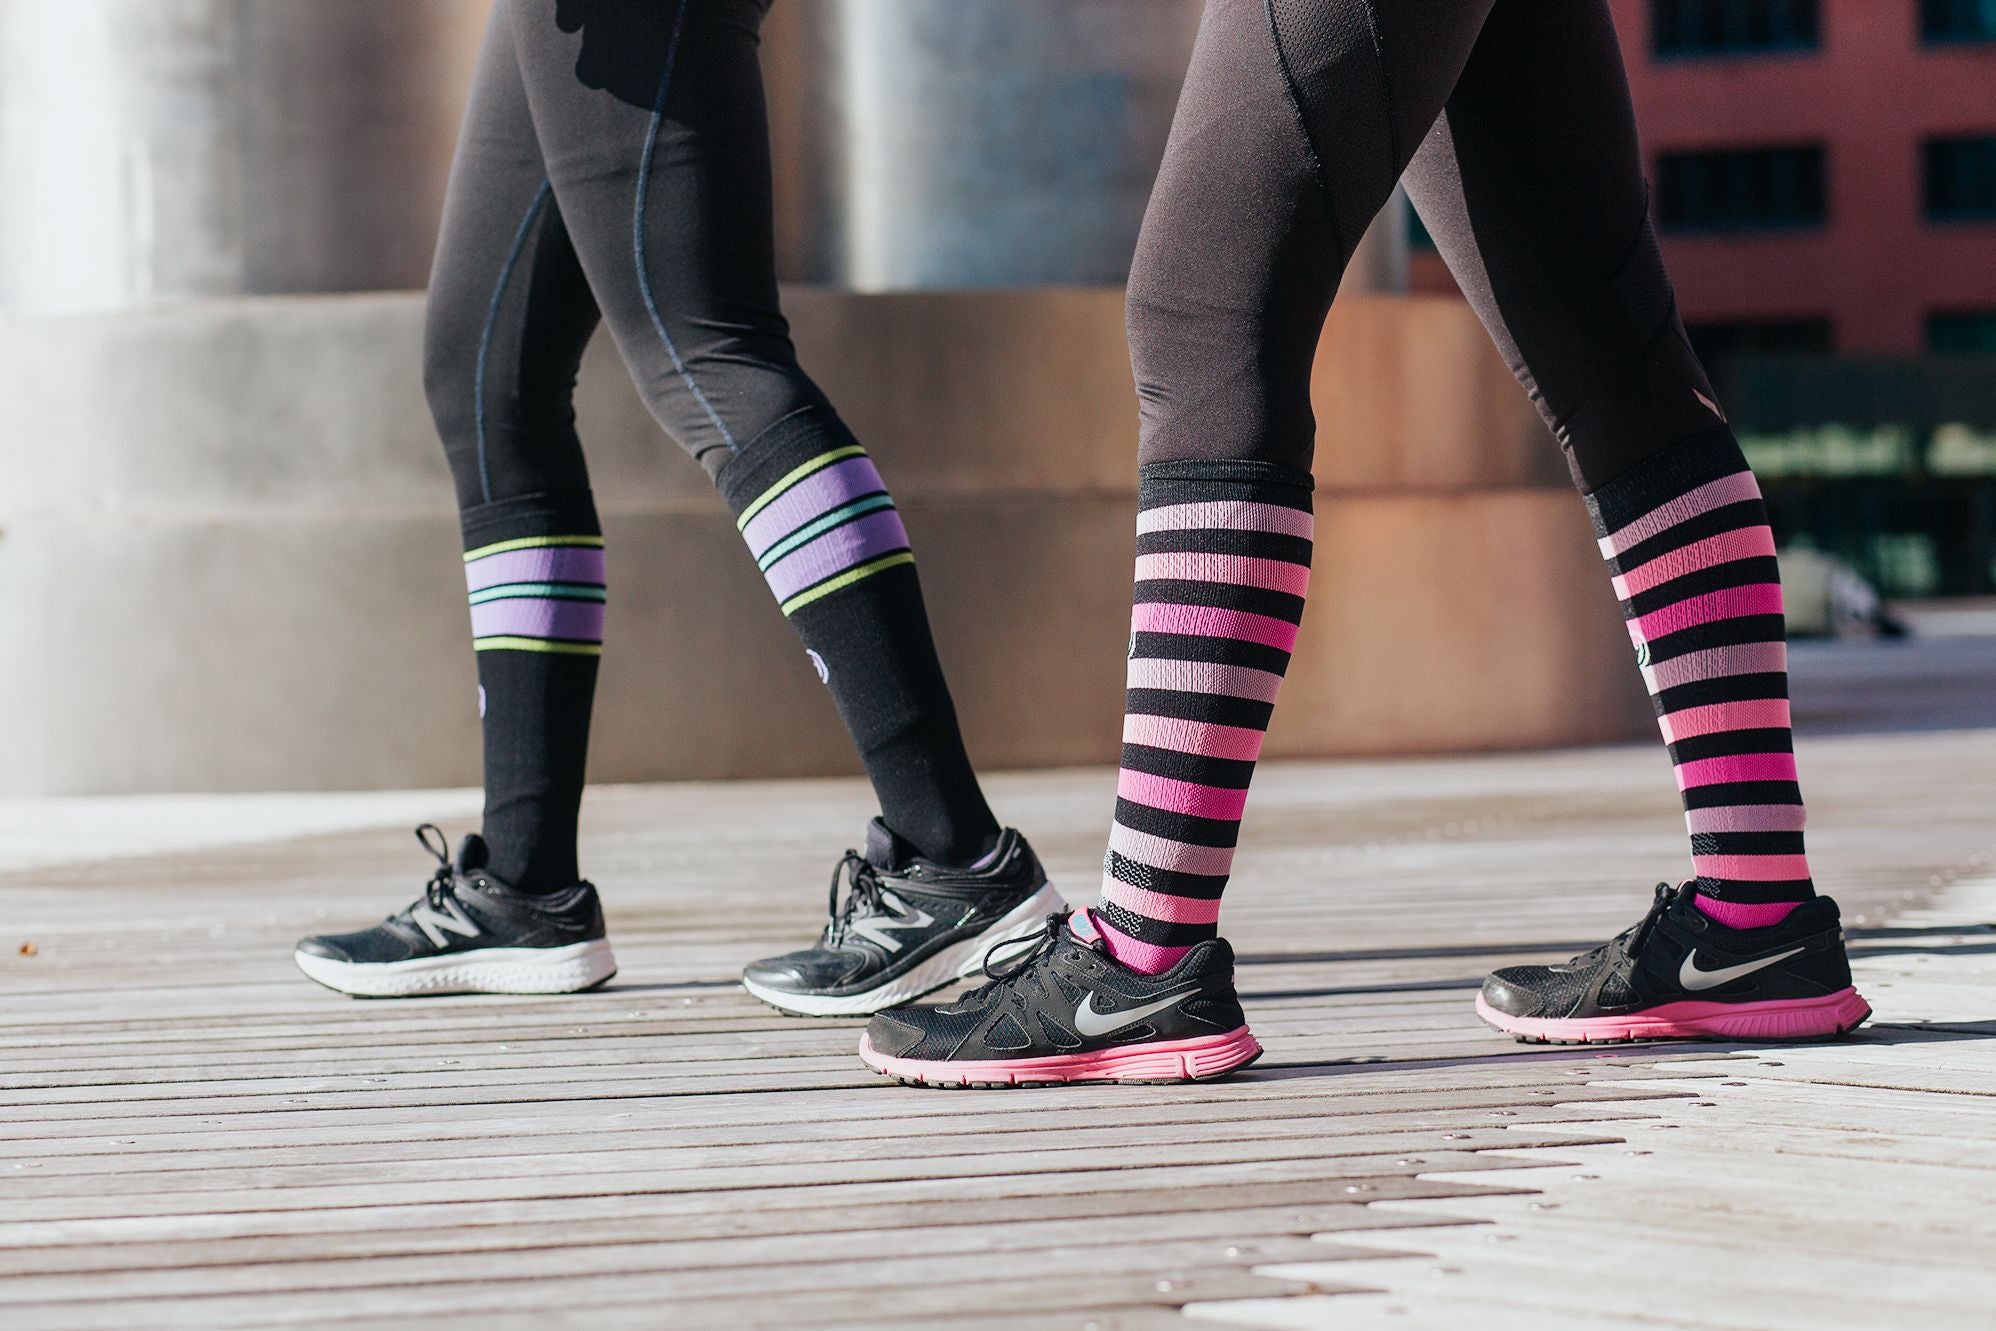 New to Compression Socks? A Beginner’s Guide to Everything You Need to Know